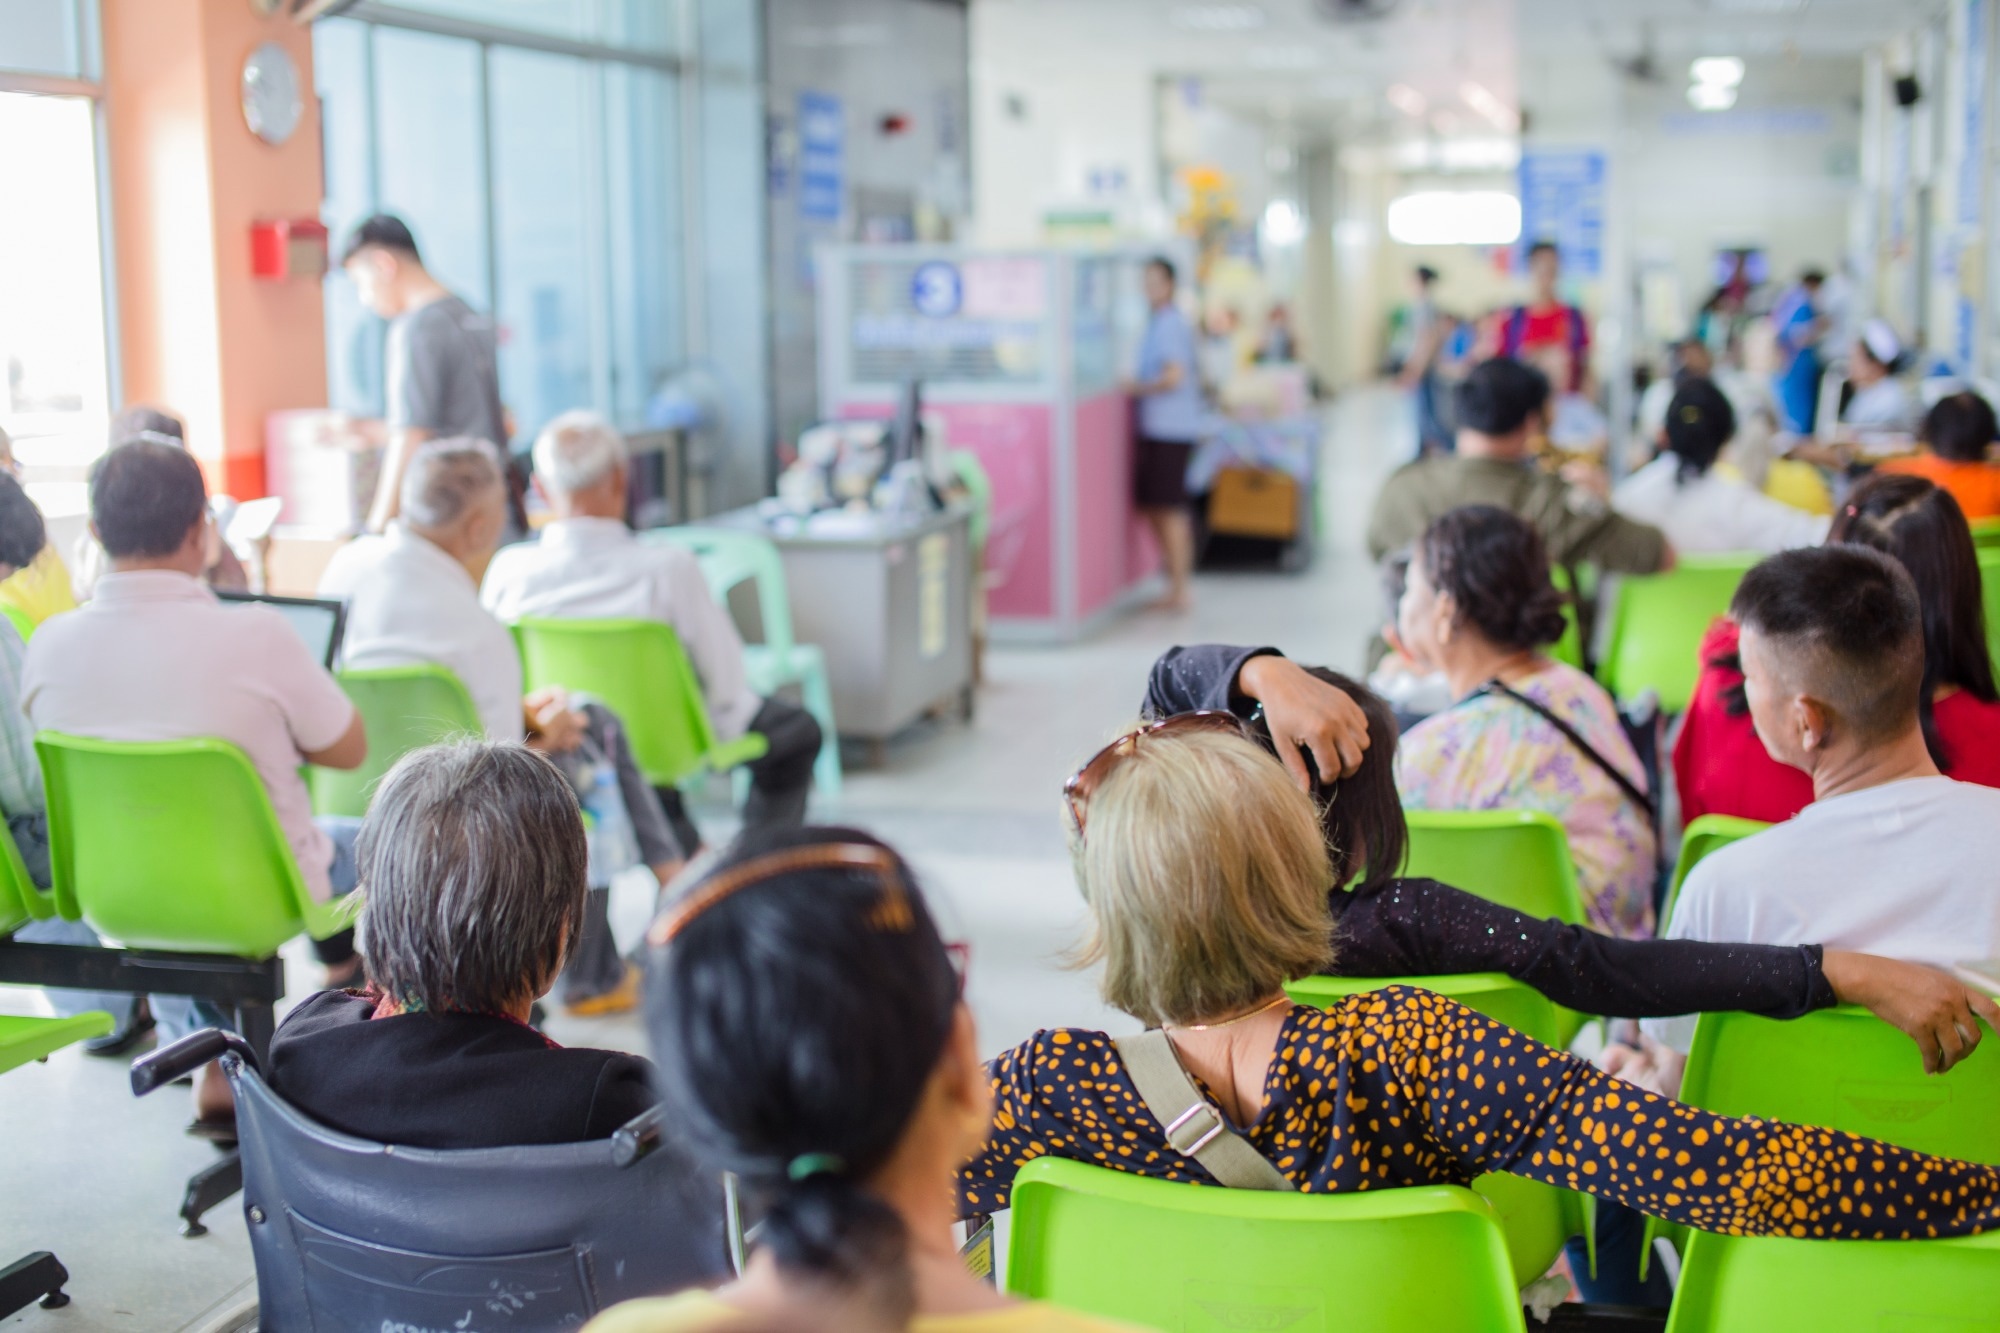 Study: Do health service waiting areas contribute to the health literacy of consumers? A scoping review. Image Credit: Medical-R/Shutterstock.com